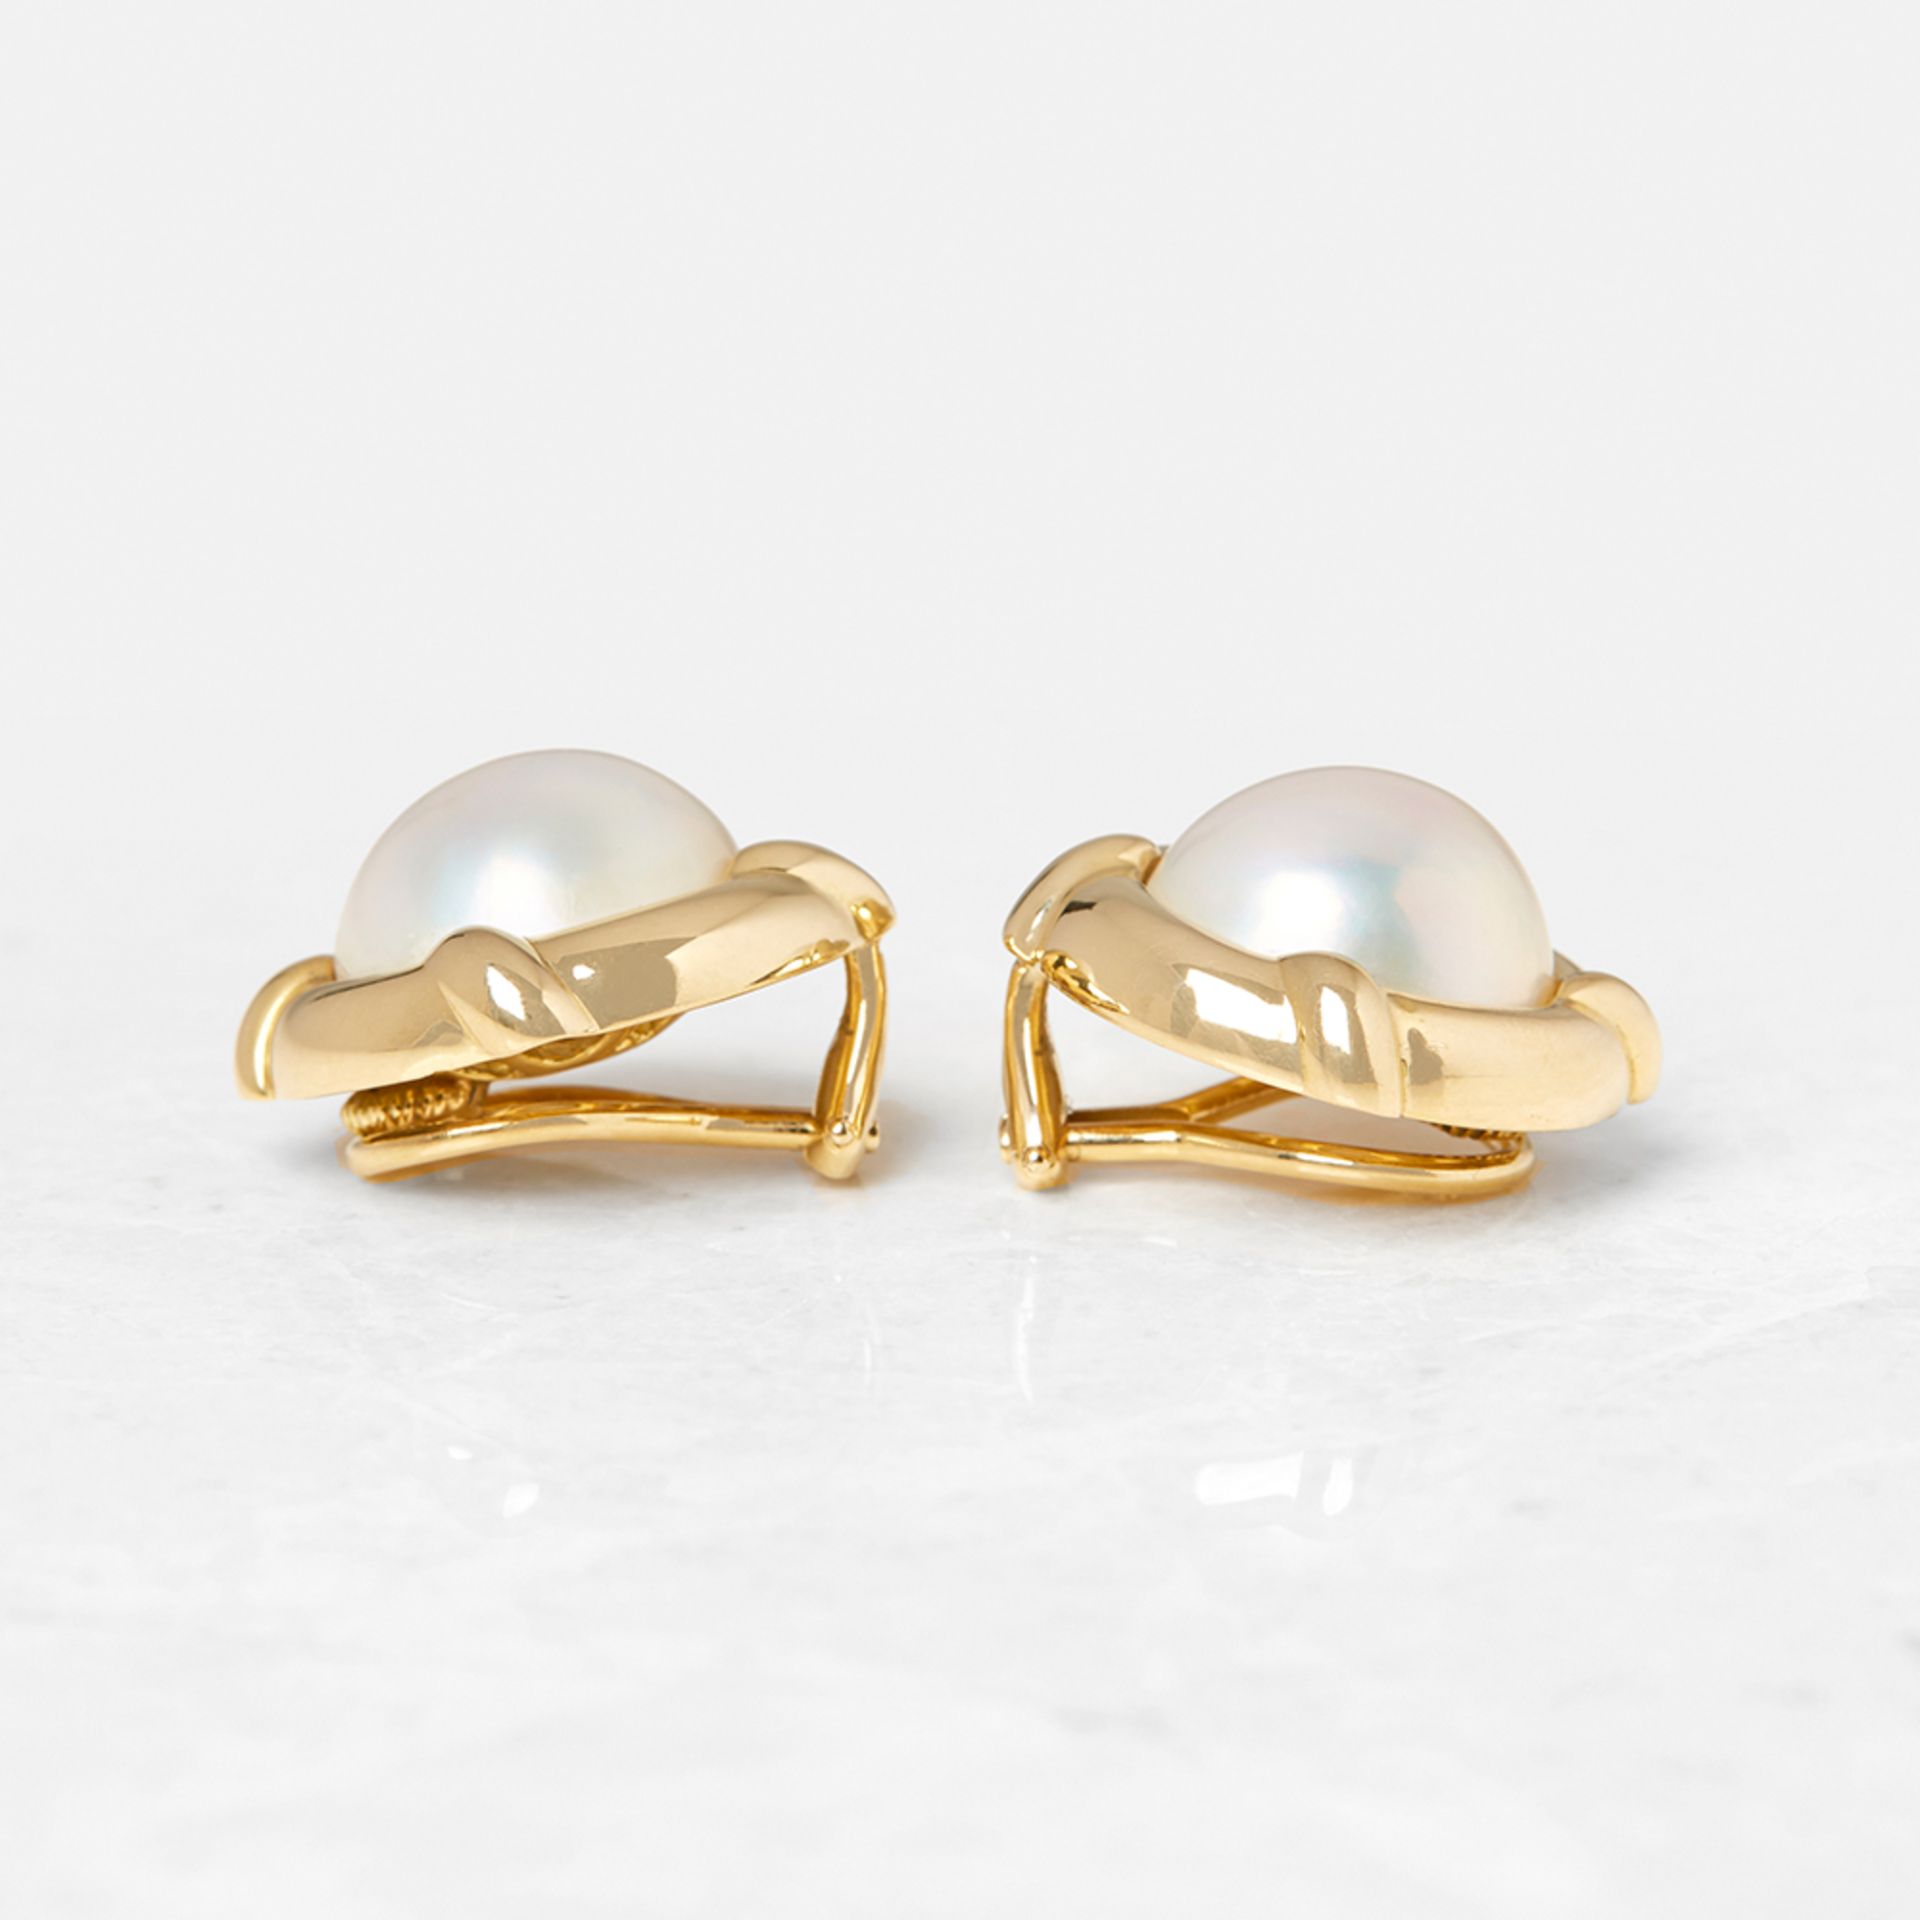 Tiffany & Co. 18k Yellow Gold Mabe Pearl Earrings - Image 3 of 8